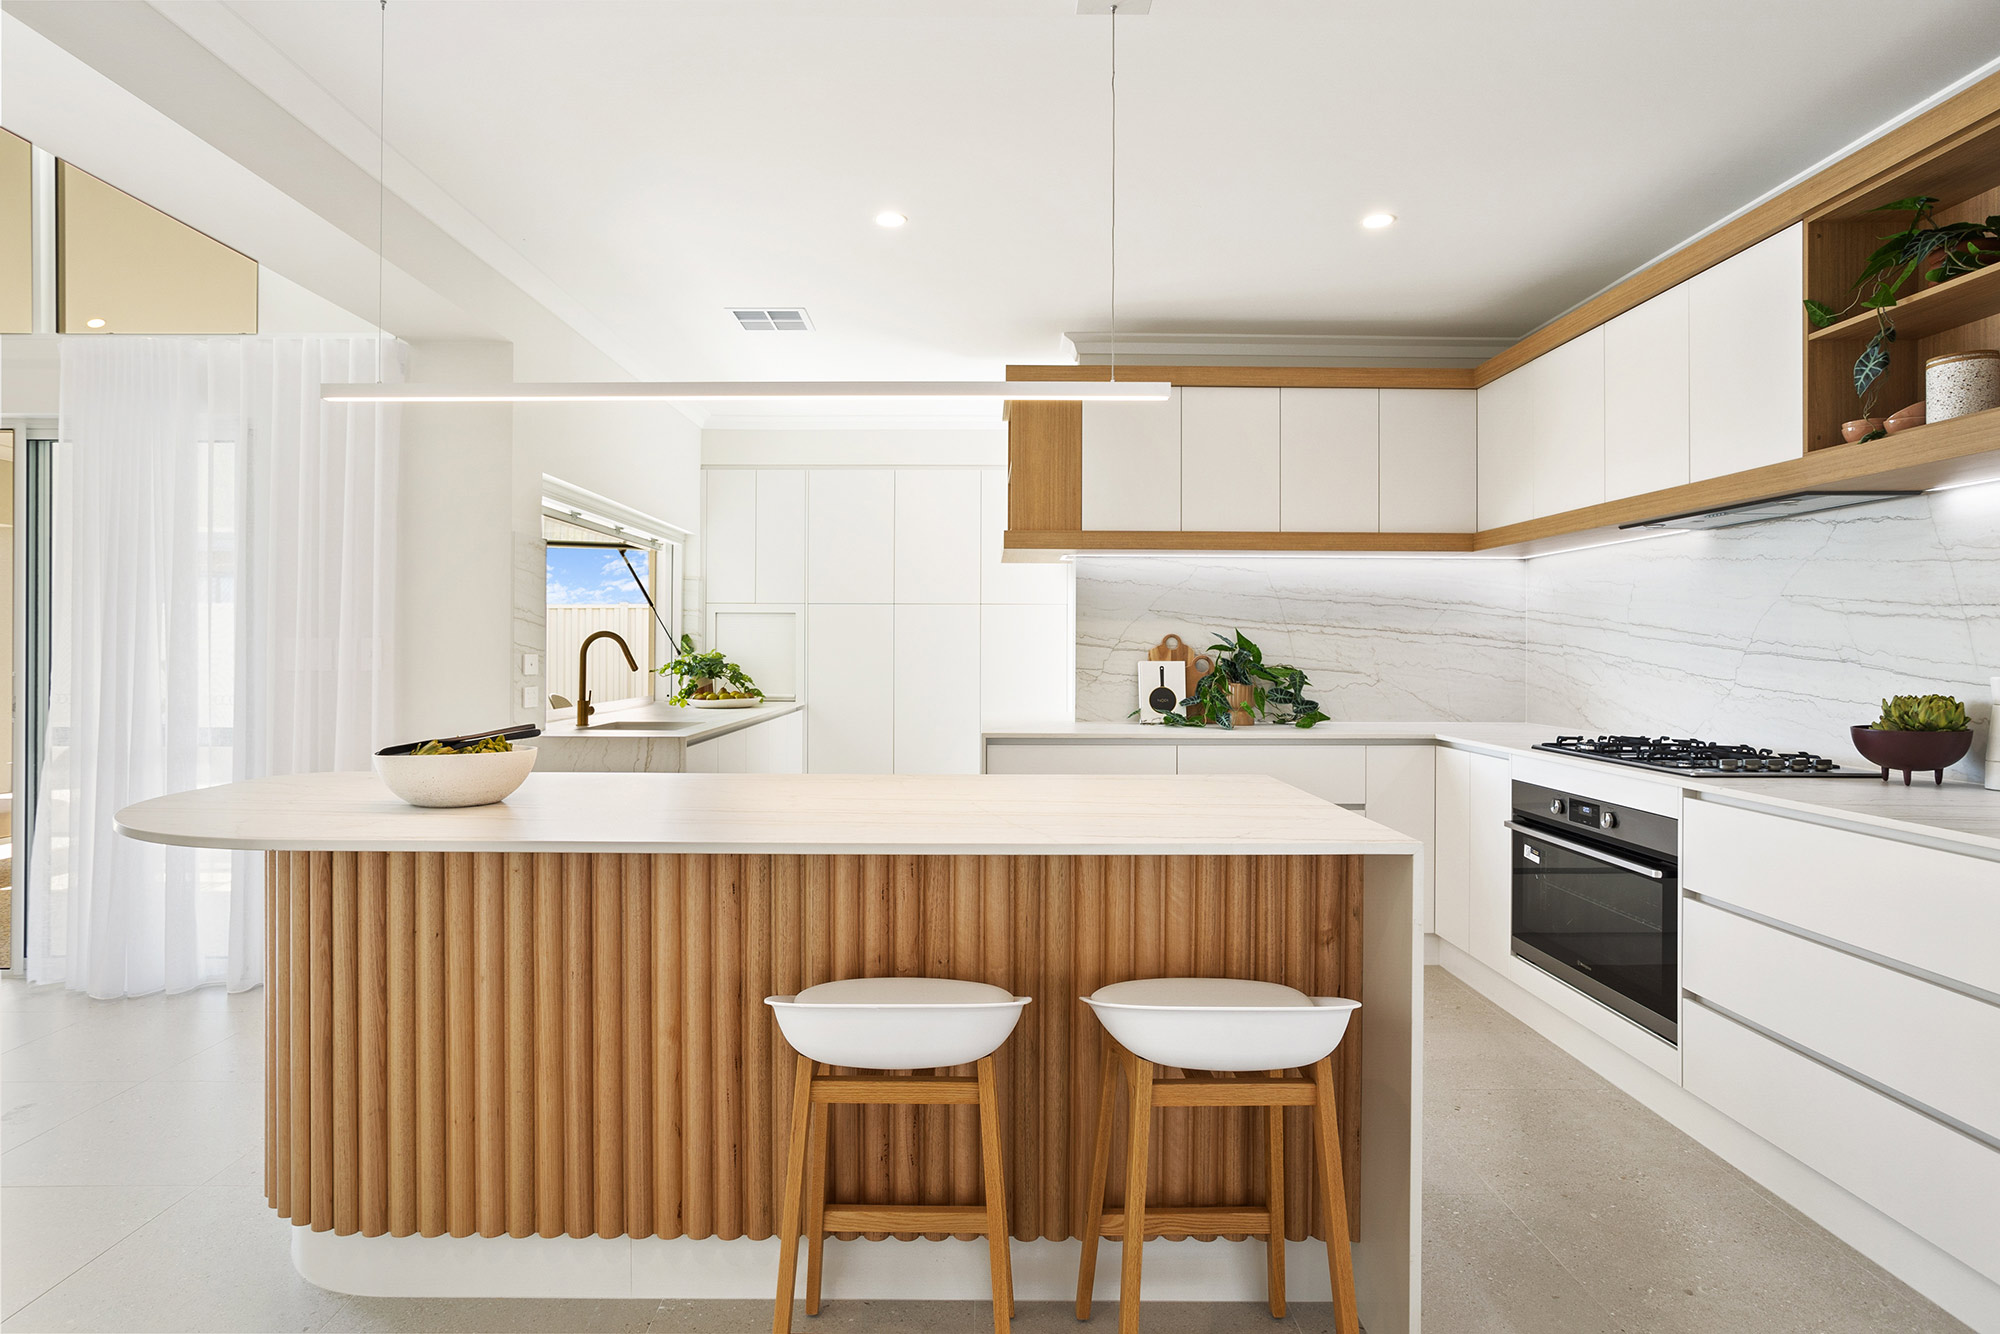 Image of Marley Display Home 4 in An ‘eco-chic’ kitchen with the naturalness of Silestone as its key feature - Cosentino